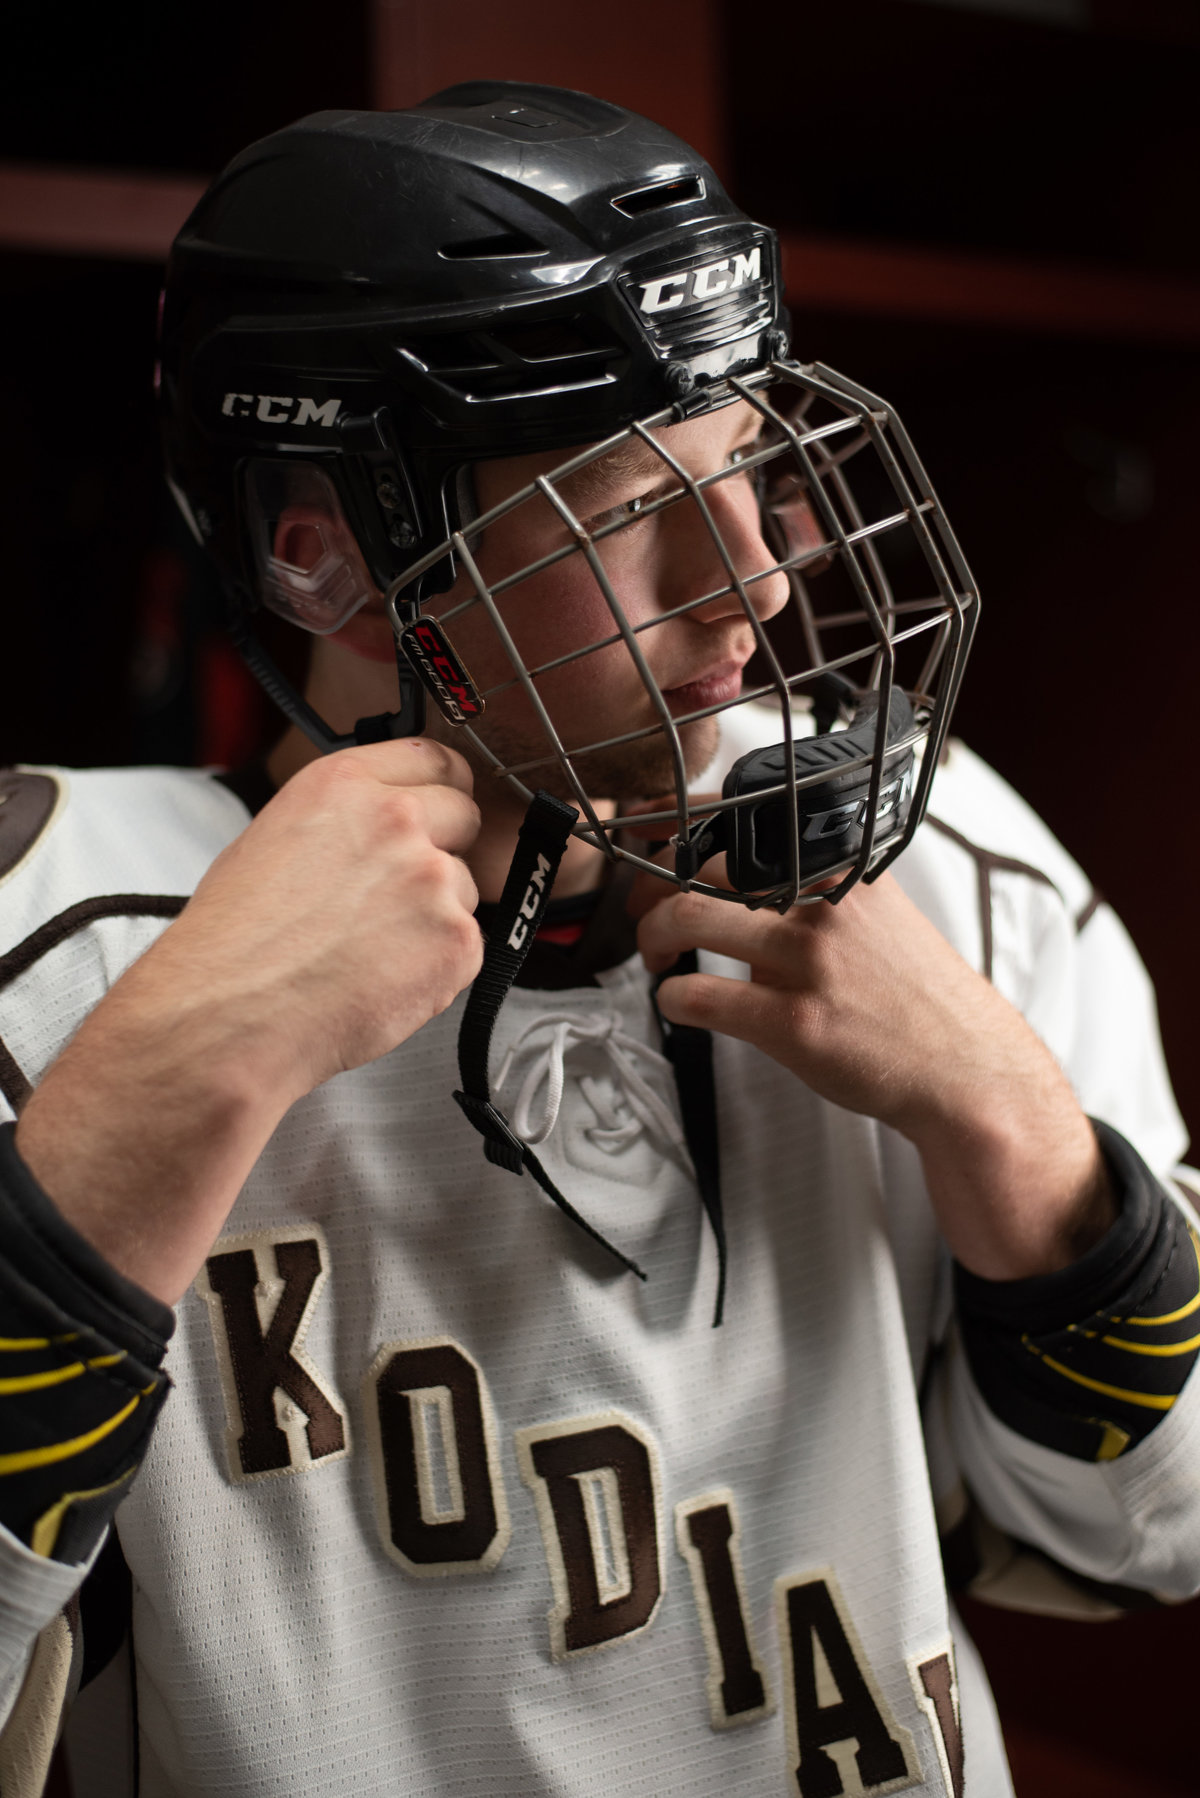 Senior guy in hockey jersey and face mask